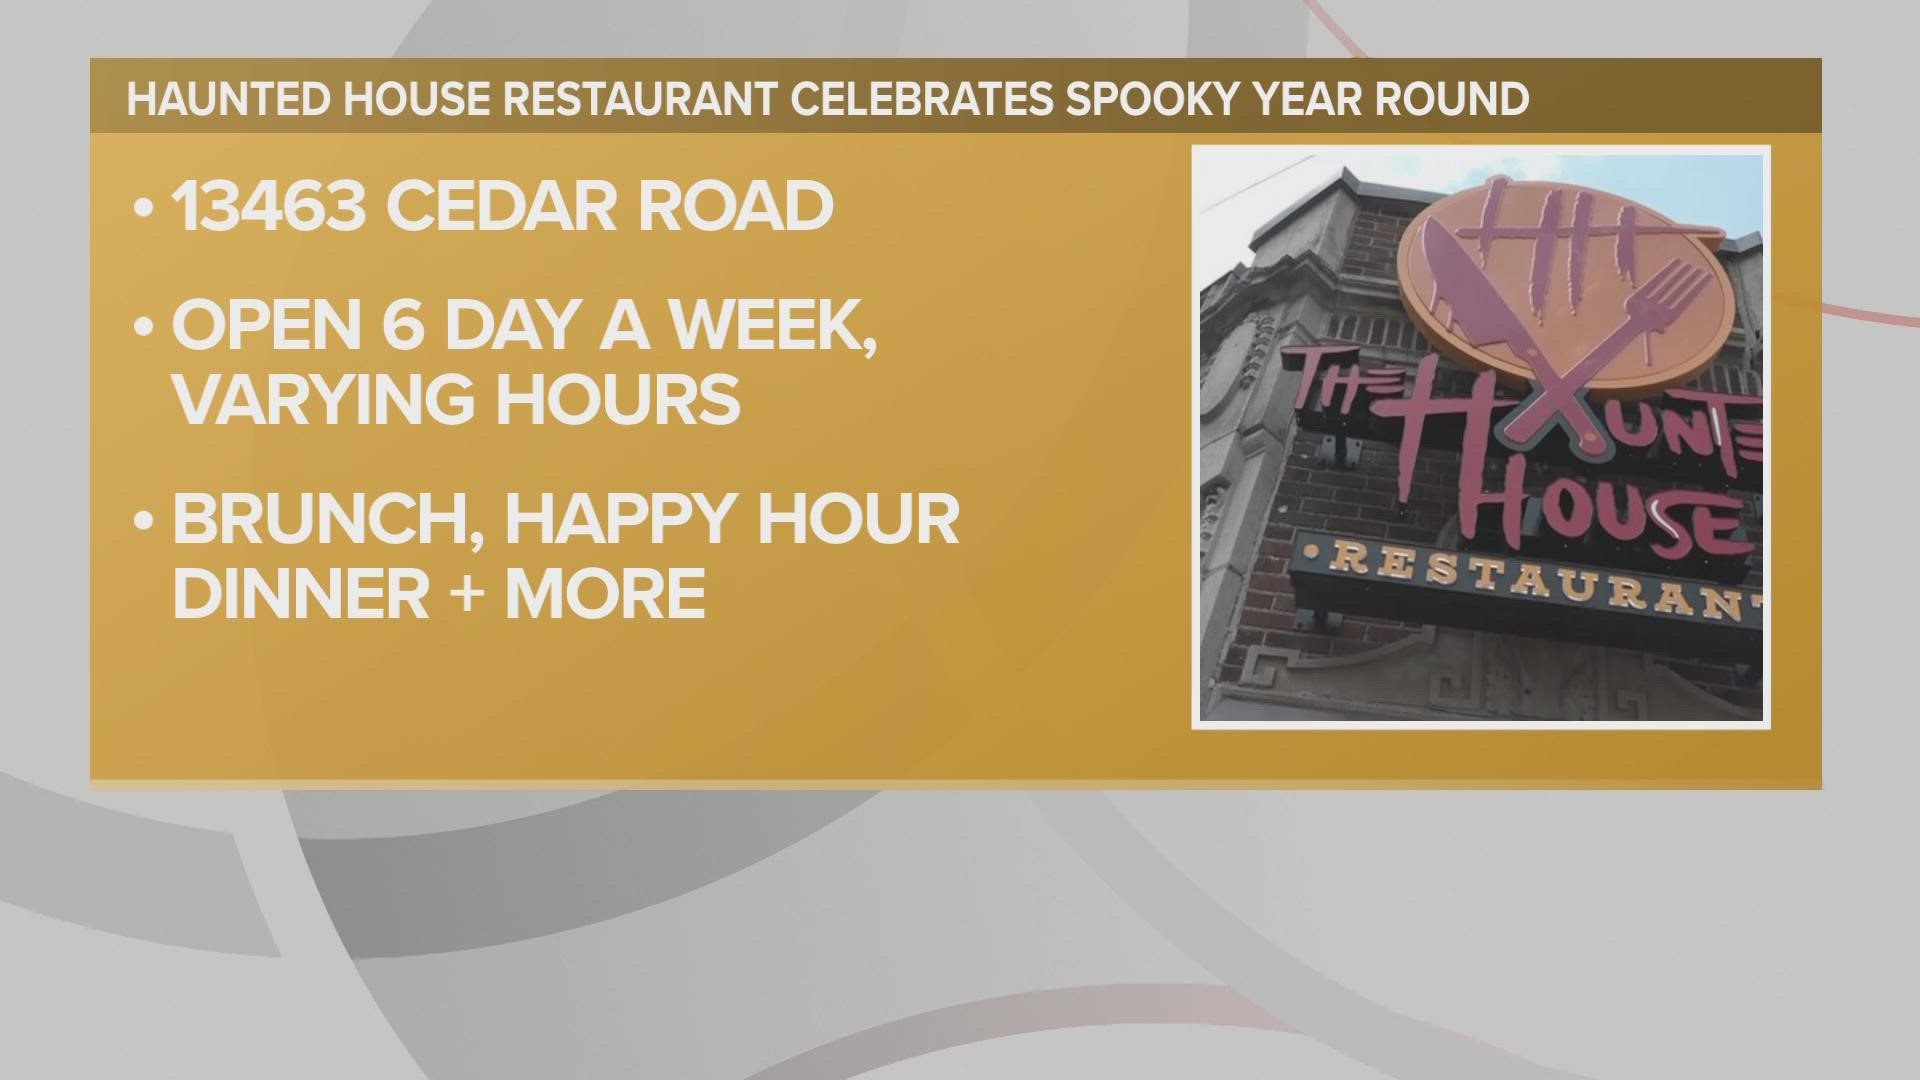 It's 'Spooky Season' all year round at the Cedar Road location, but this weekend is particularly special.